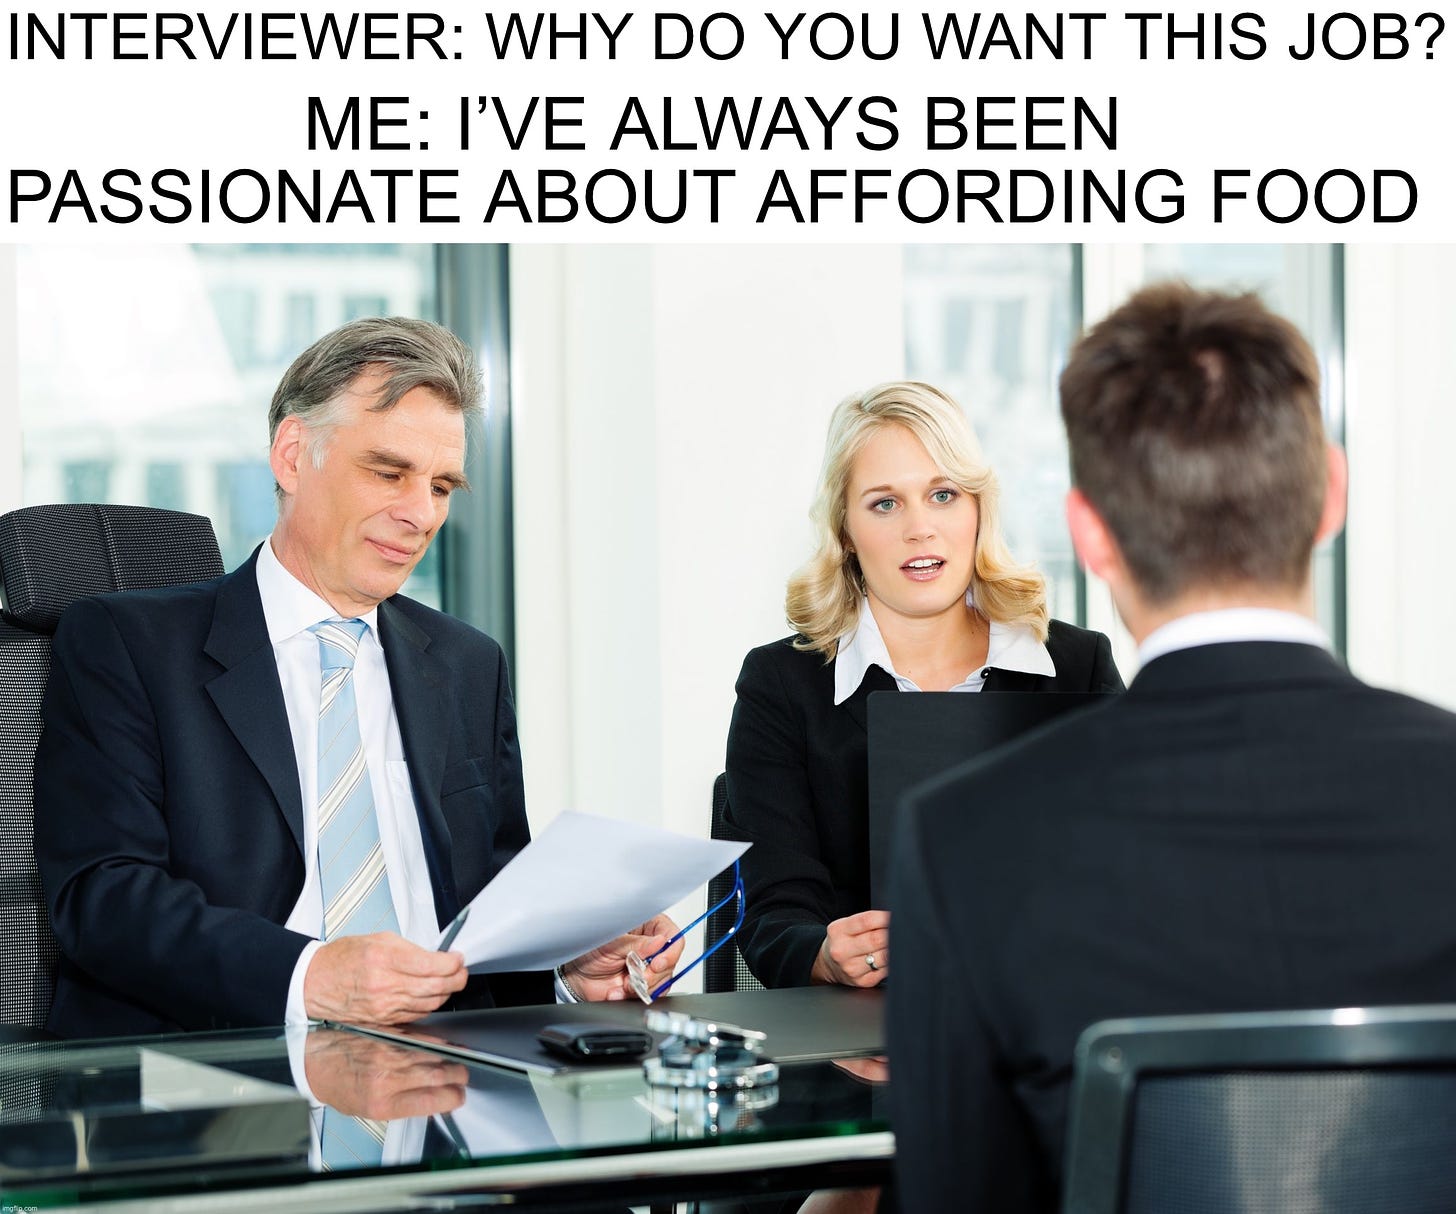 data engineering meme; interview; passionate about affording food